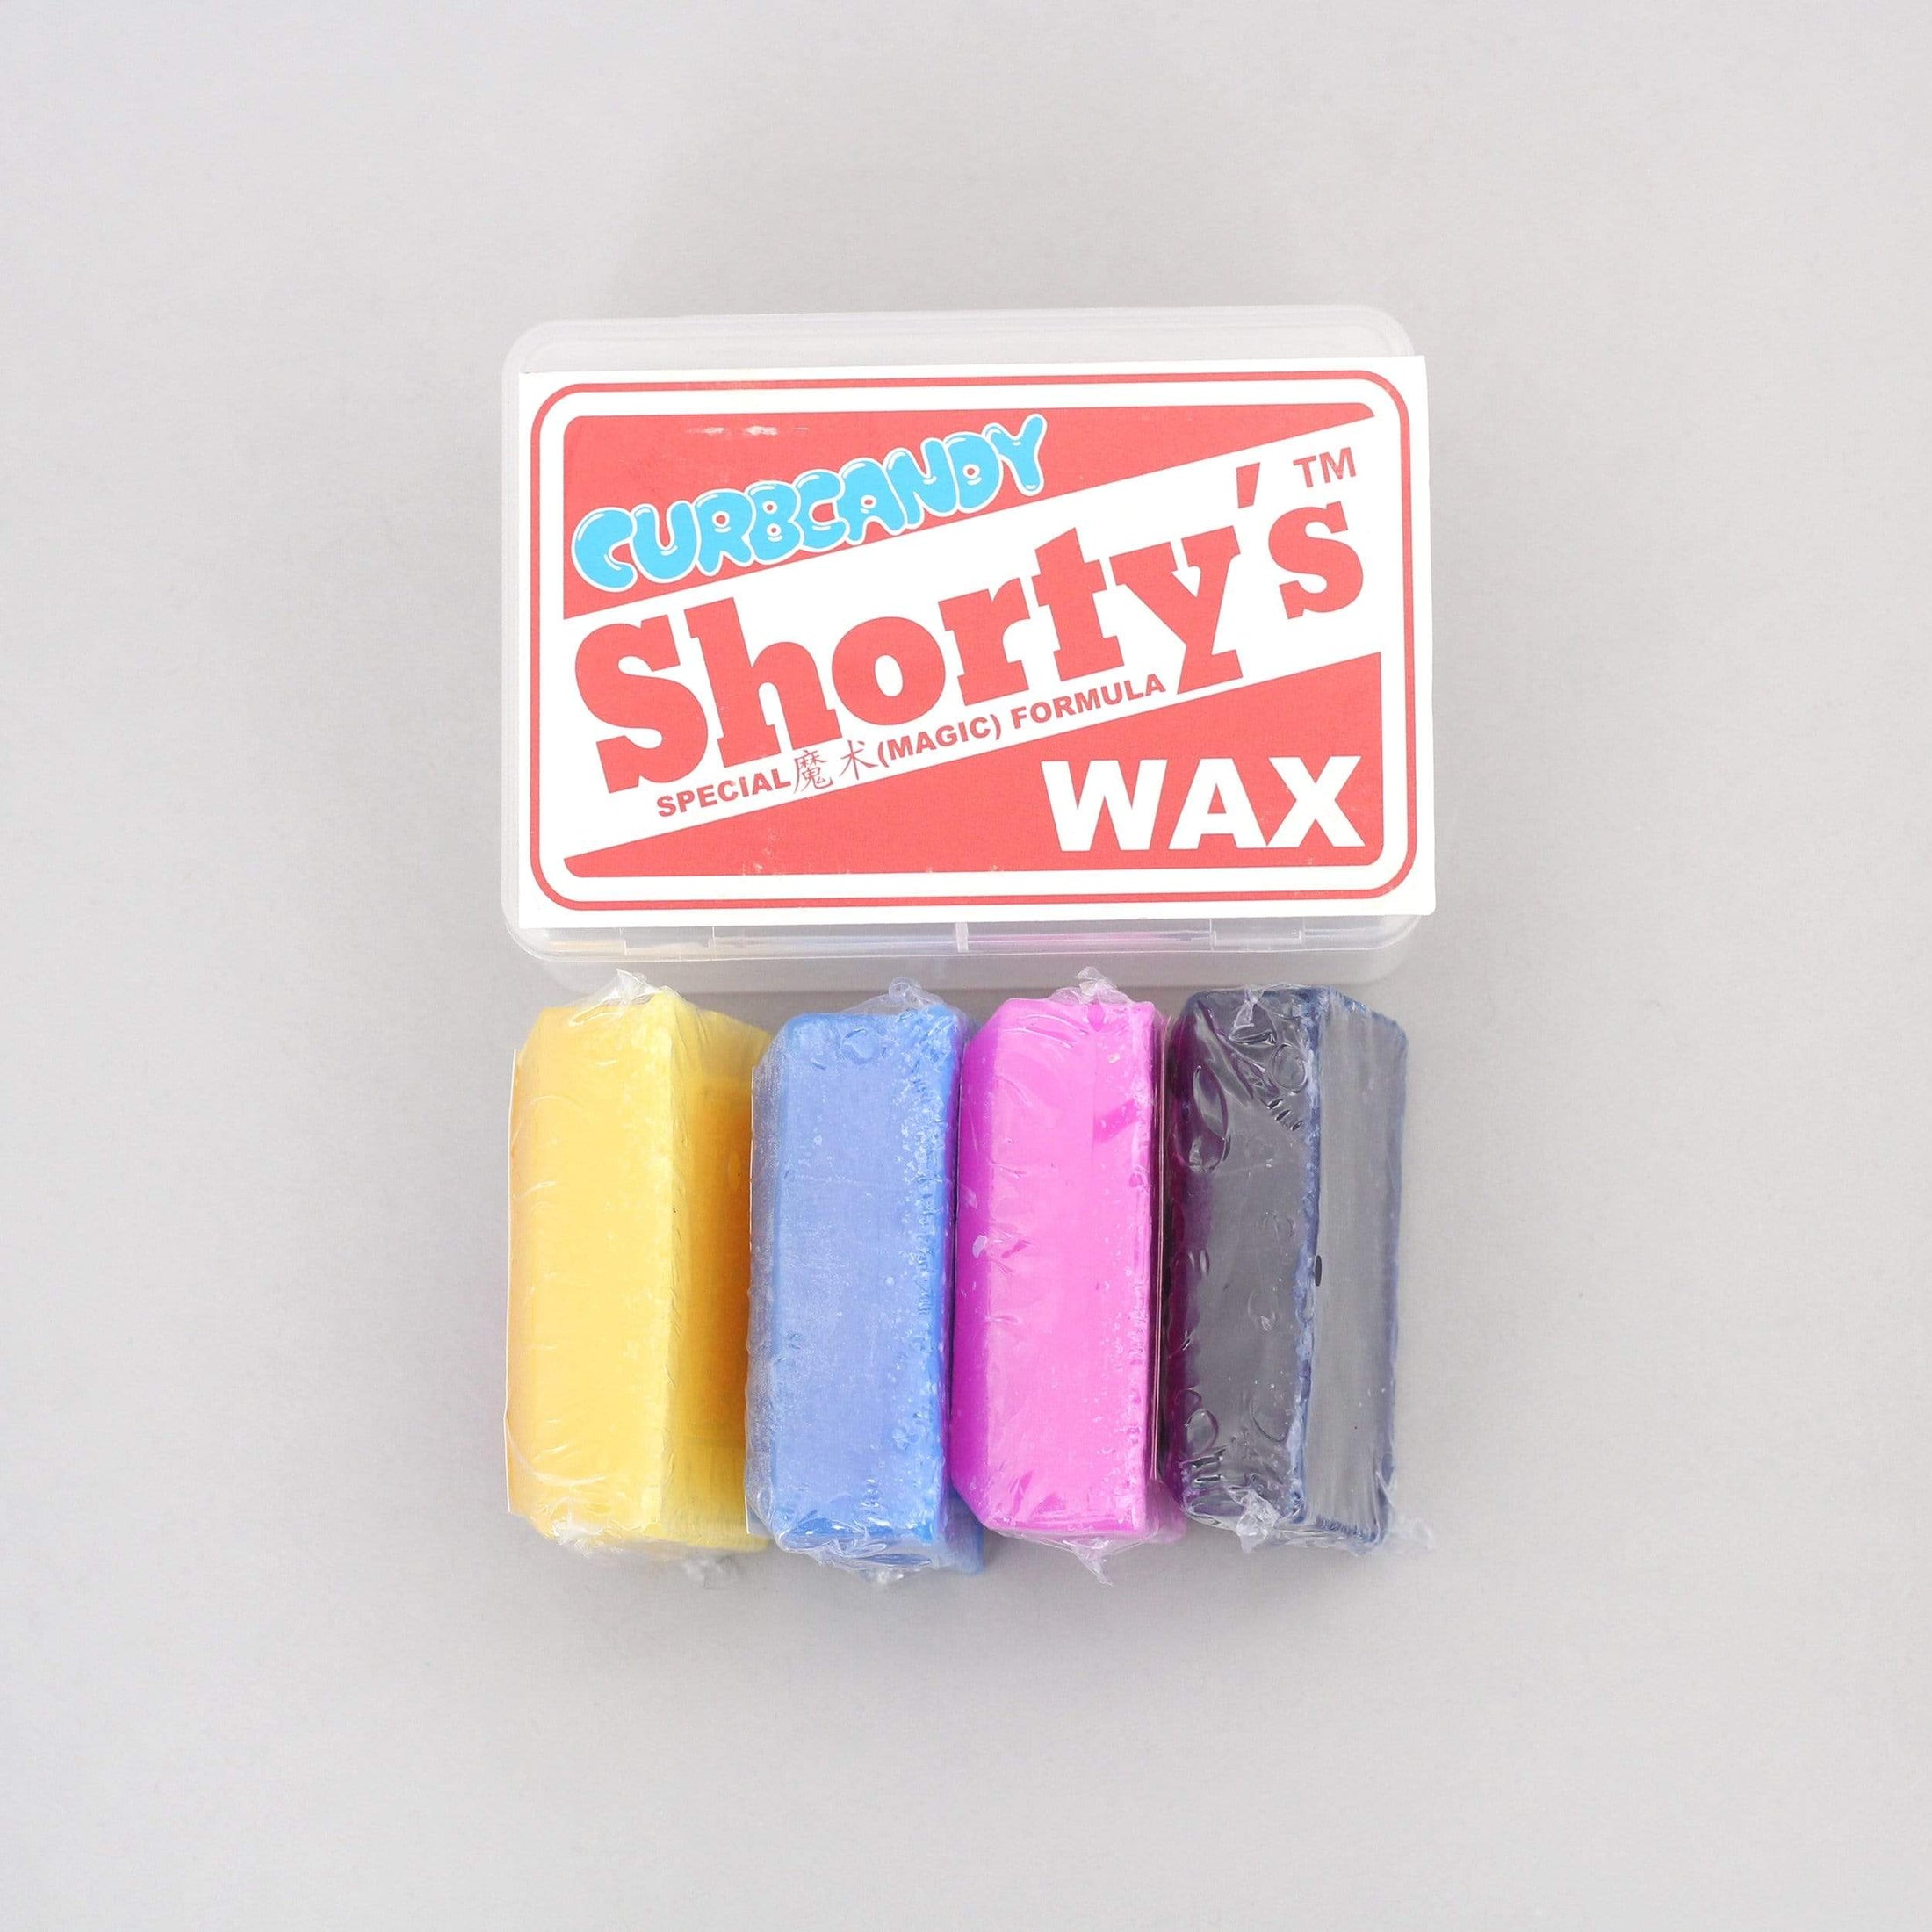 Shorty's Curb Candy Wax 5 pack Skate Wax